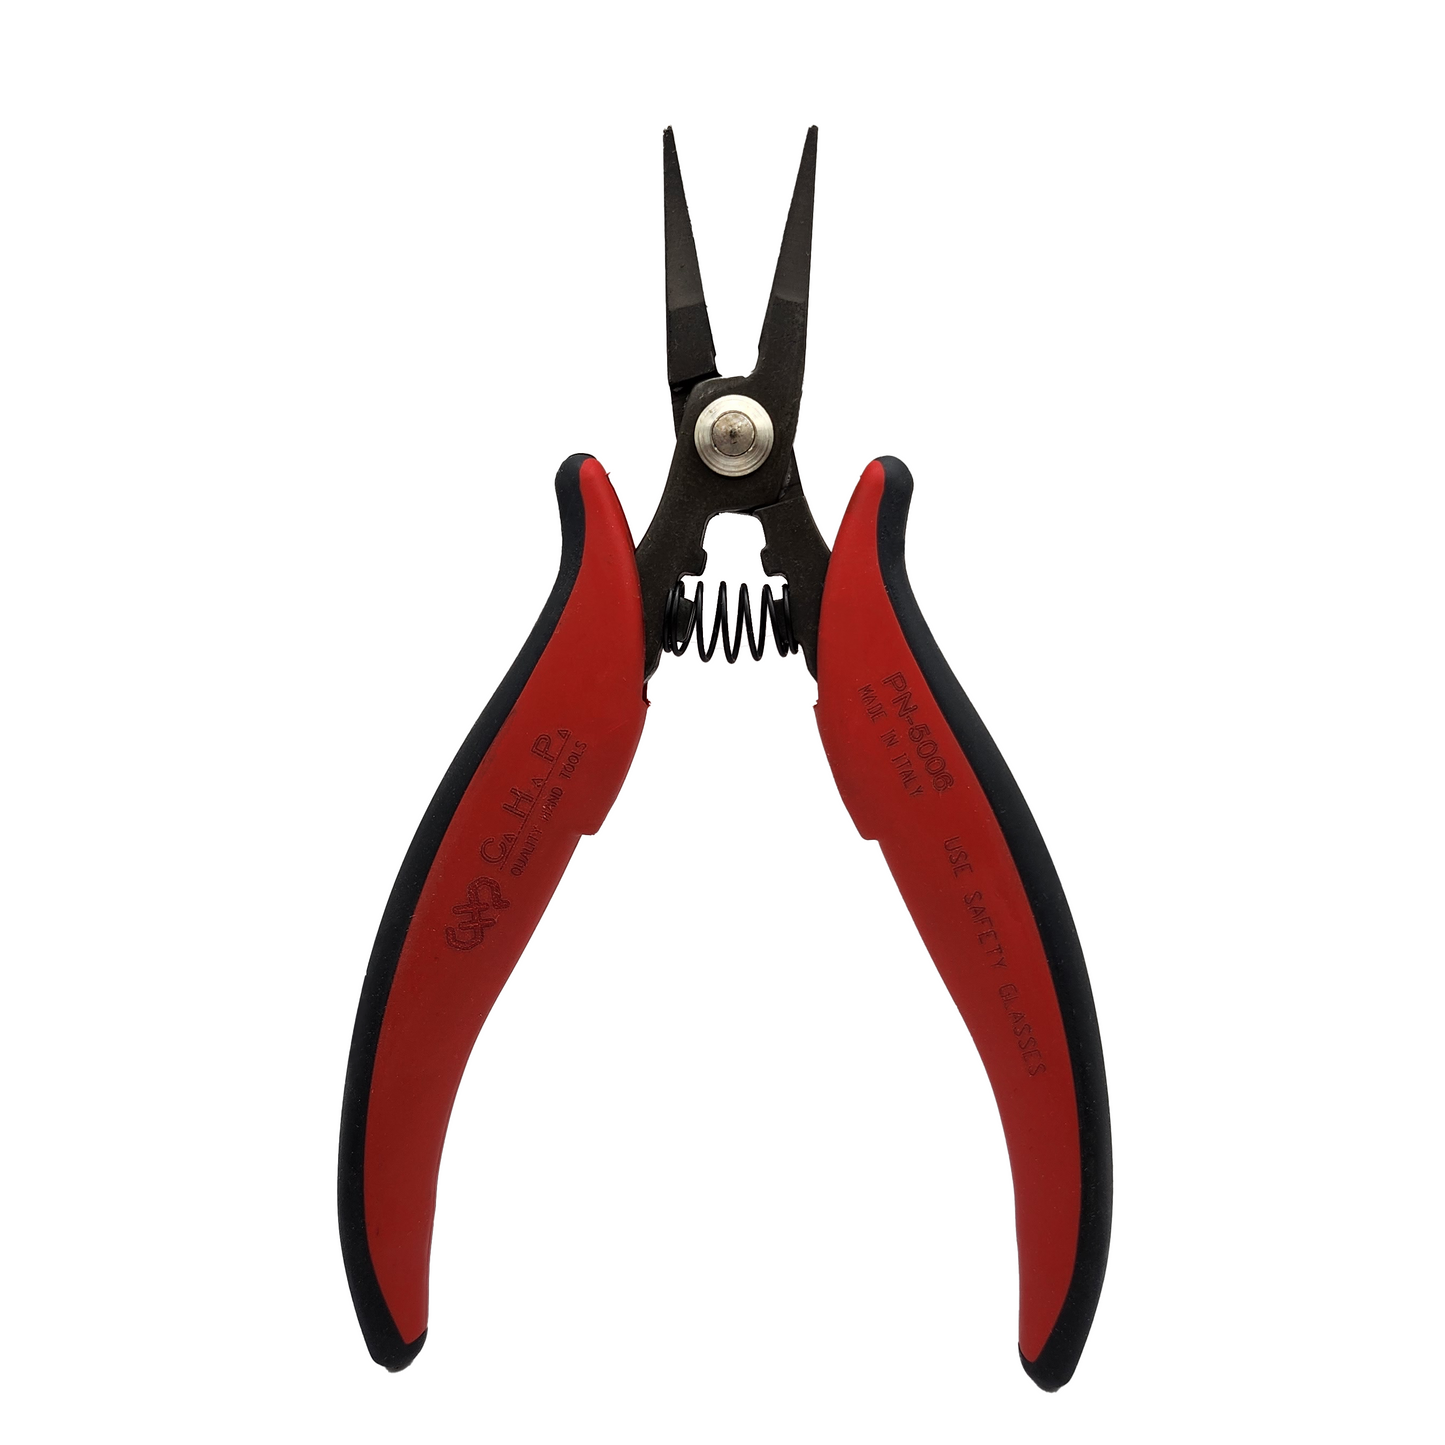 CHP_ CHP PN-5006_ Cutters, Pliers, Multi-Tools_ Hakko Products